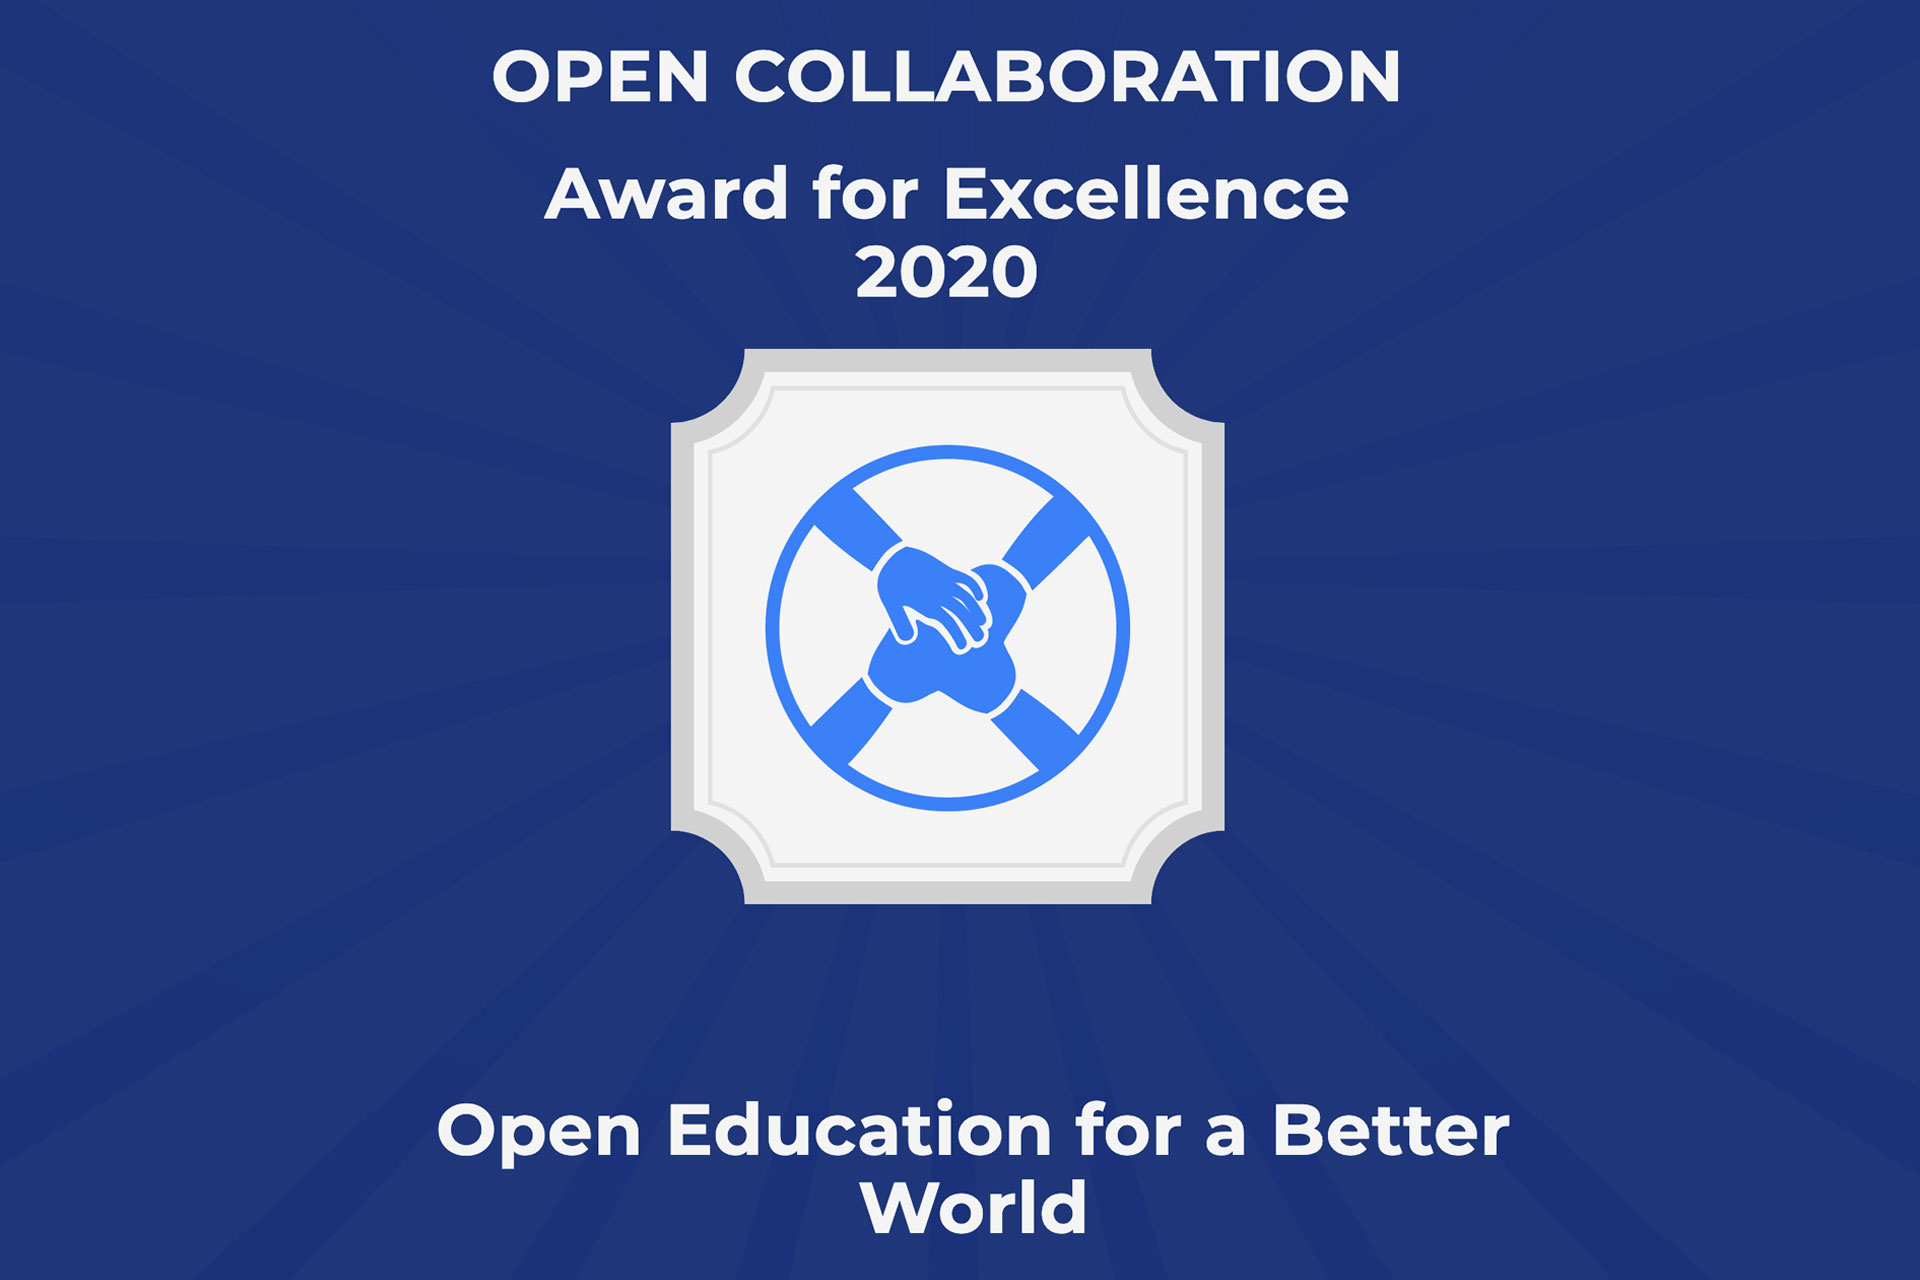 OE4BW IS THE RECIPIENT OF THE OPEN COLLABORATION AWARD FOR EXCELLENCE!